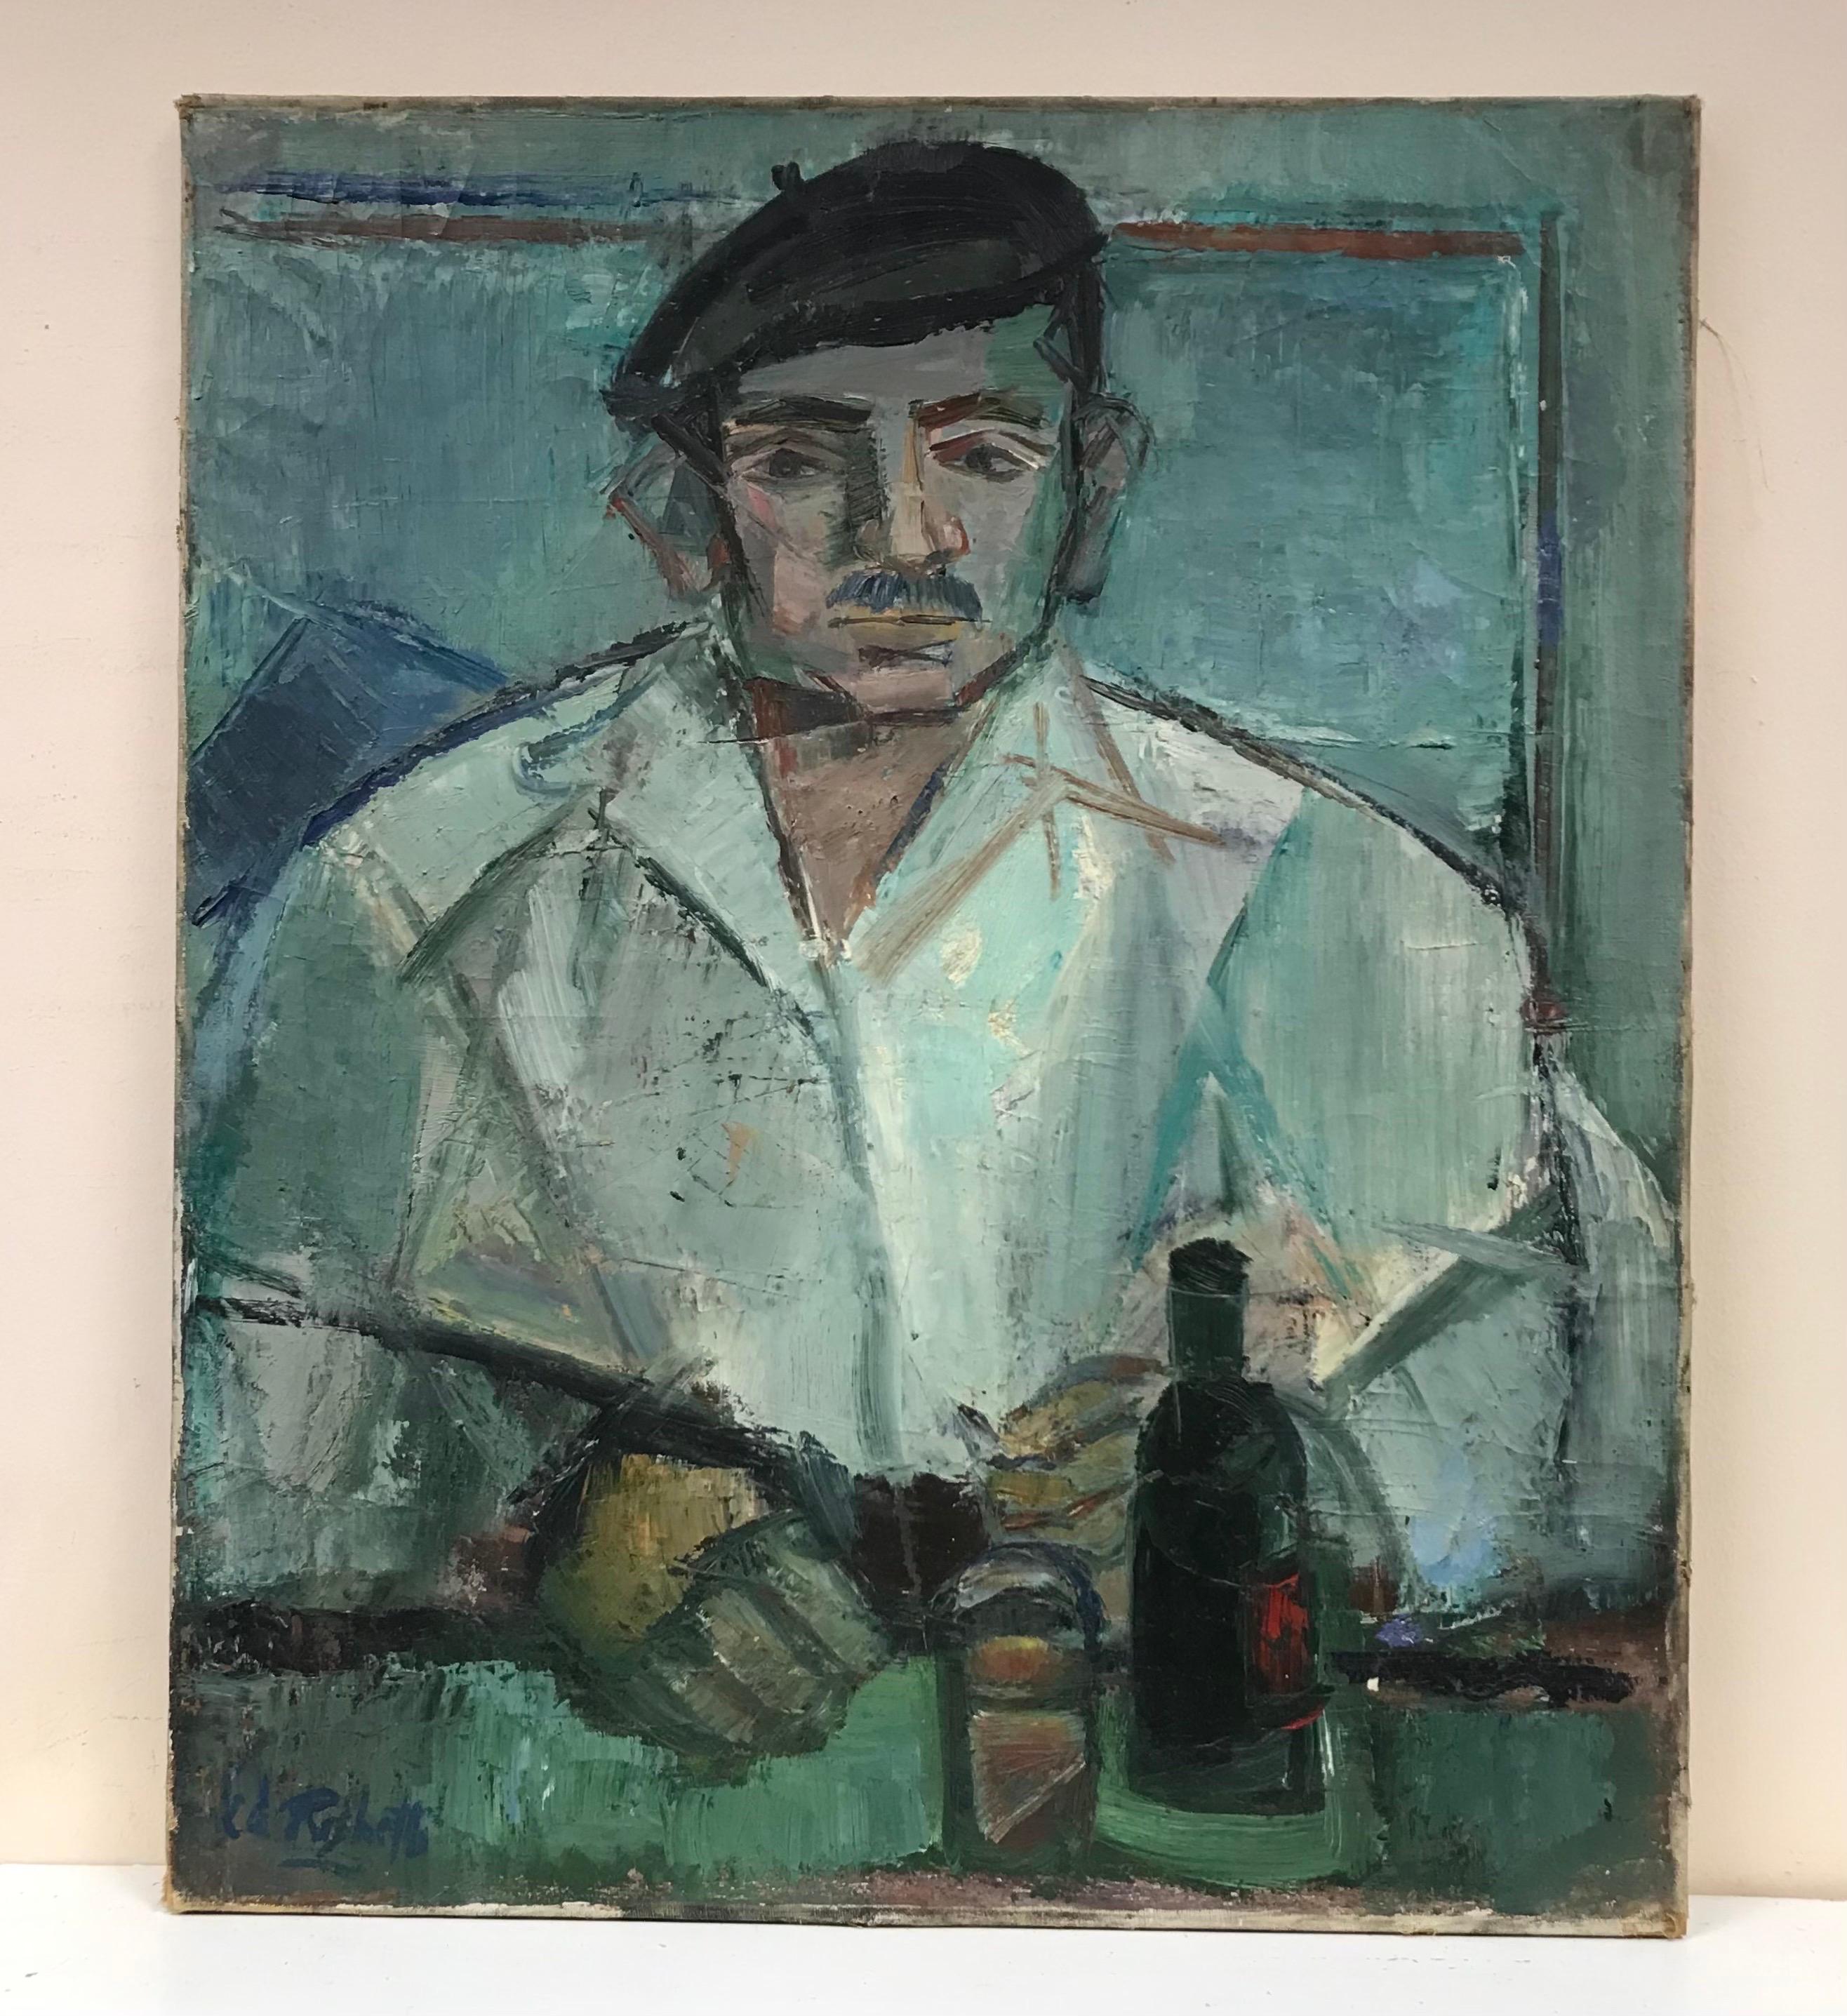 Superb 20th Century French Signed Oil - Portrait of Man in Beret in Bar Interior - Painting by Édouard Righetti (1924-2001)